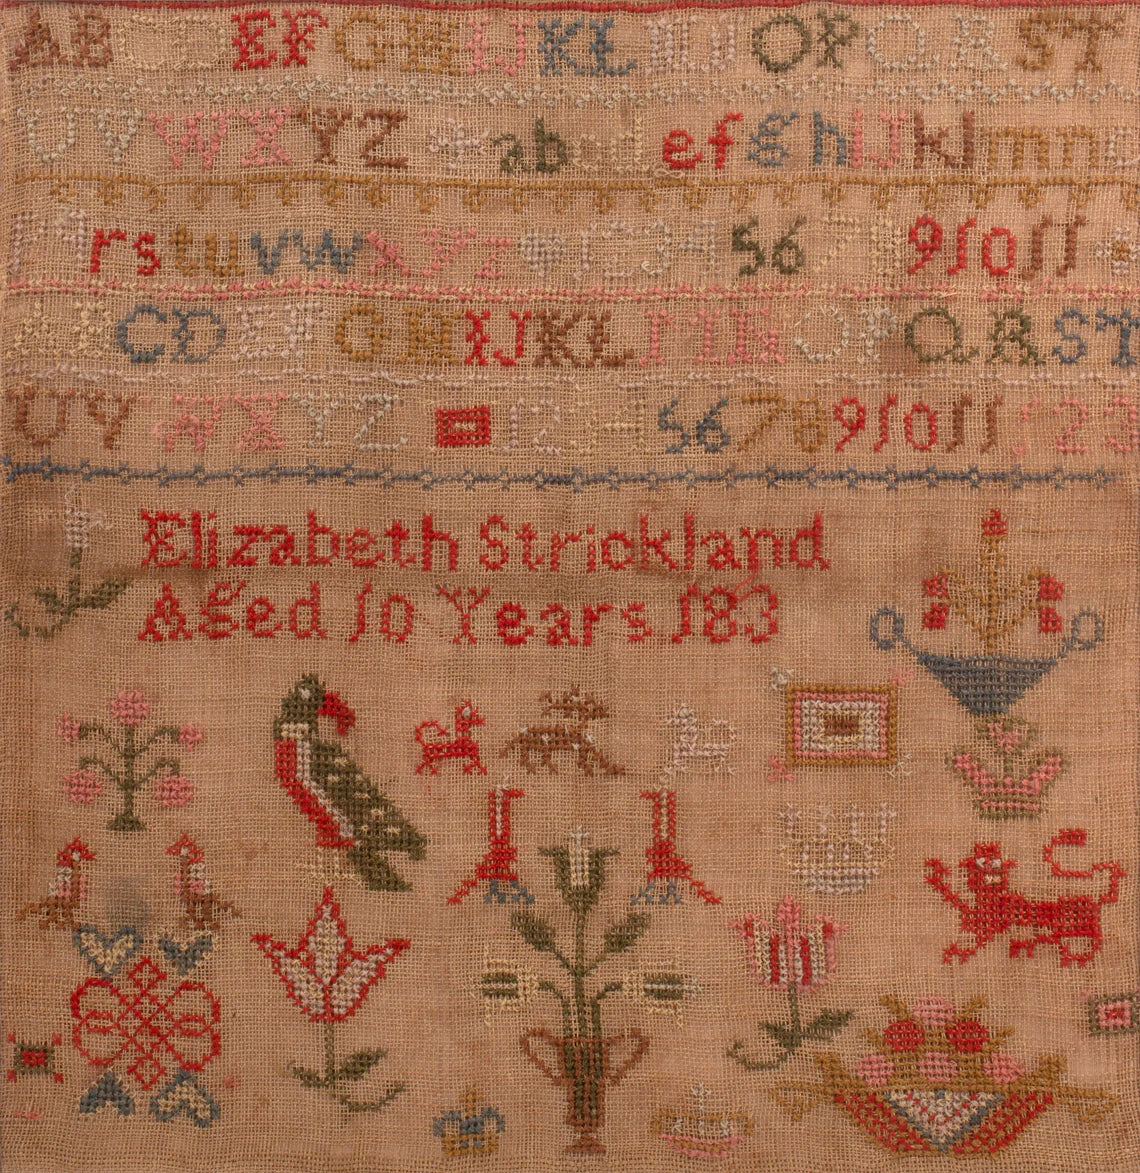 Girl with a Gavel Stitches - Elizabeth Strickland 1836 - Booklet Chart with Roxy Floss Co Conversion